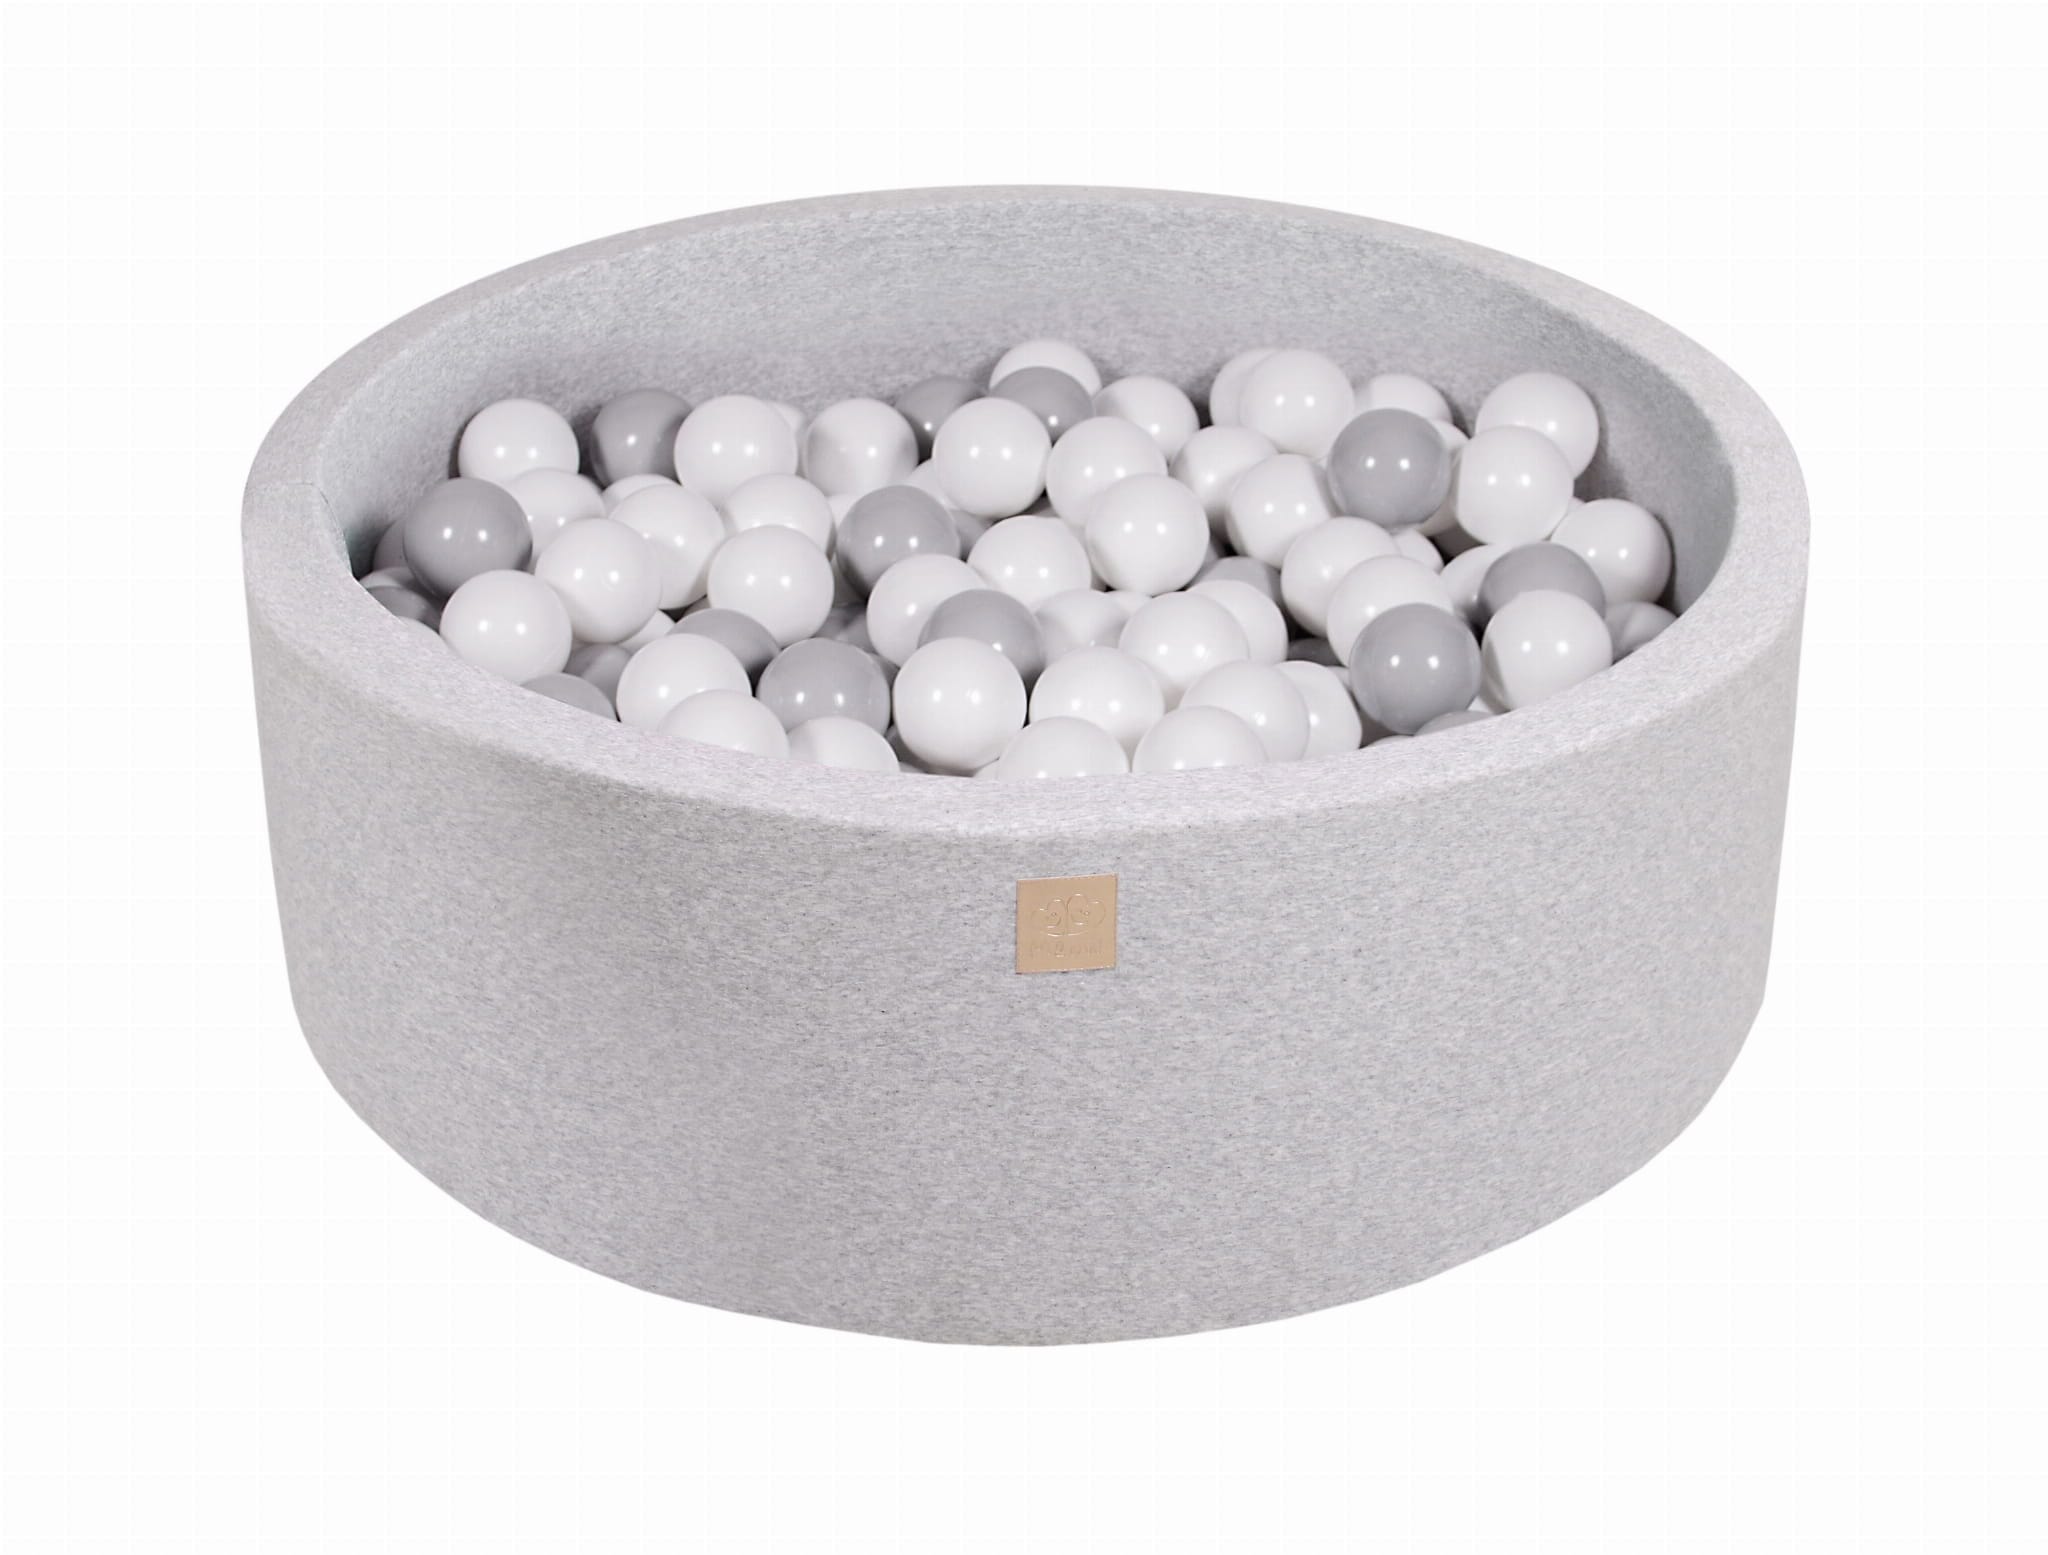 Luxury Cotton Round Ball Pit - Smooth 'n Pure For Kids By MeowBaby